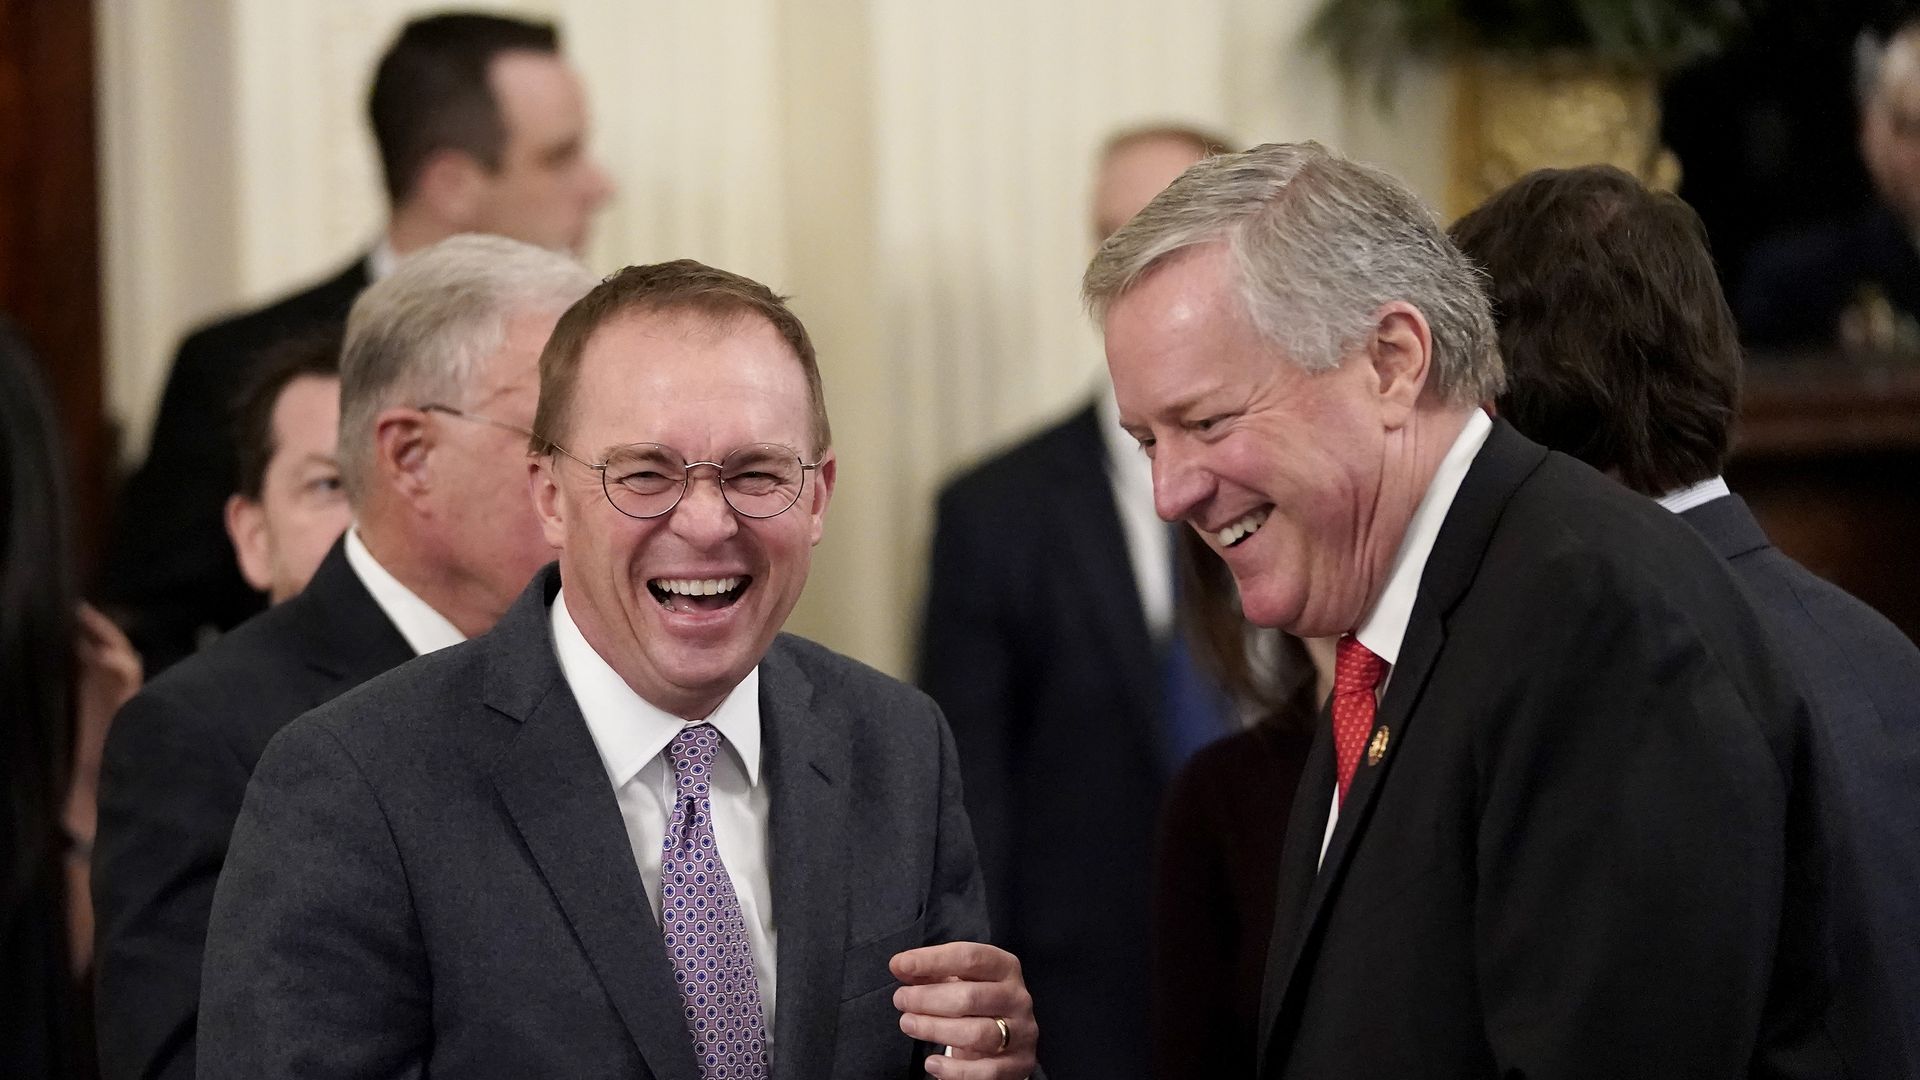 Mick Mulvaney and Mark Meadows stand next to one another while laughing